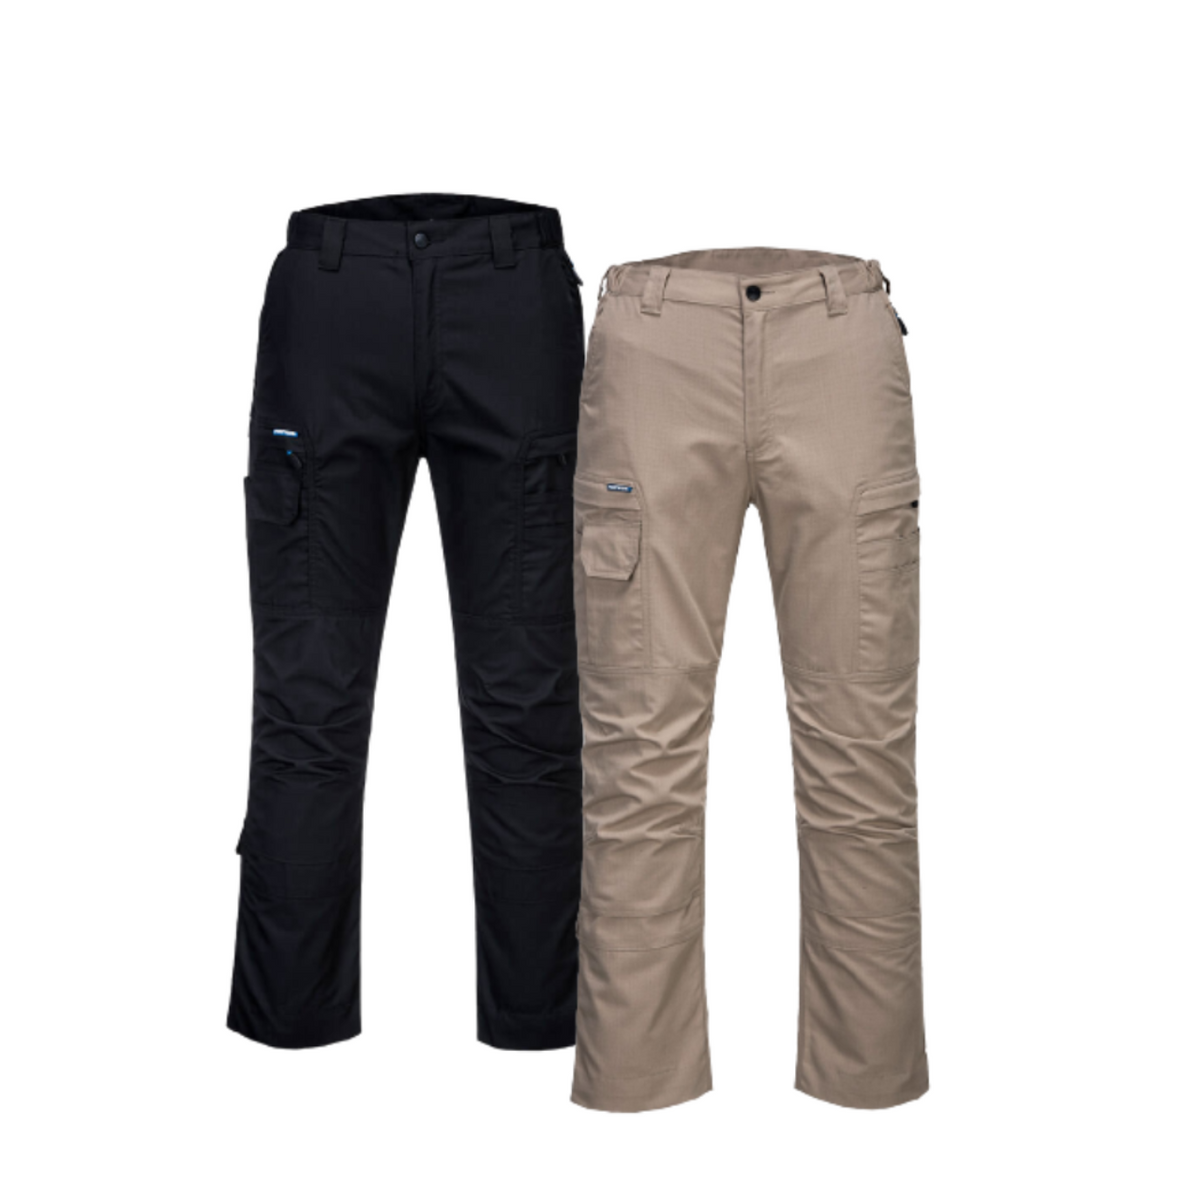 Portwest KX3 Ripstop Pants Slim Fit Multi Function Pocket Tapered Pant T802-Collins Clothing Co